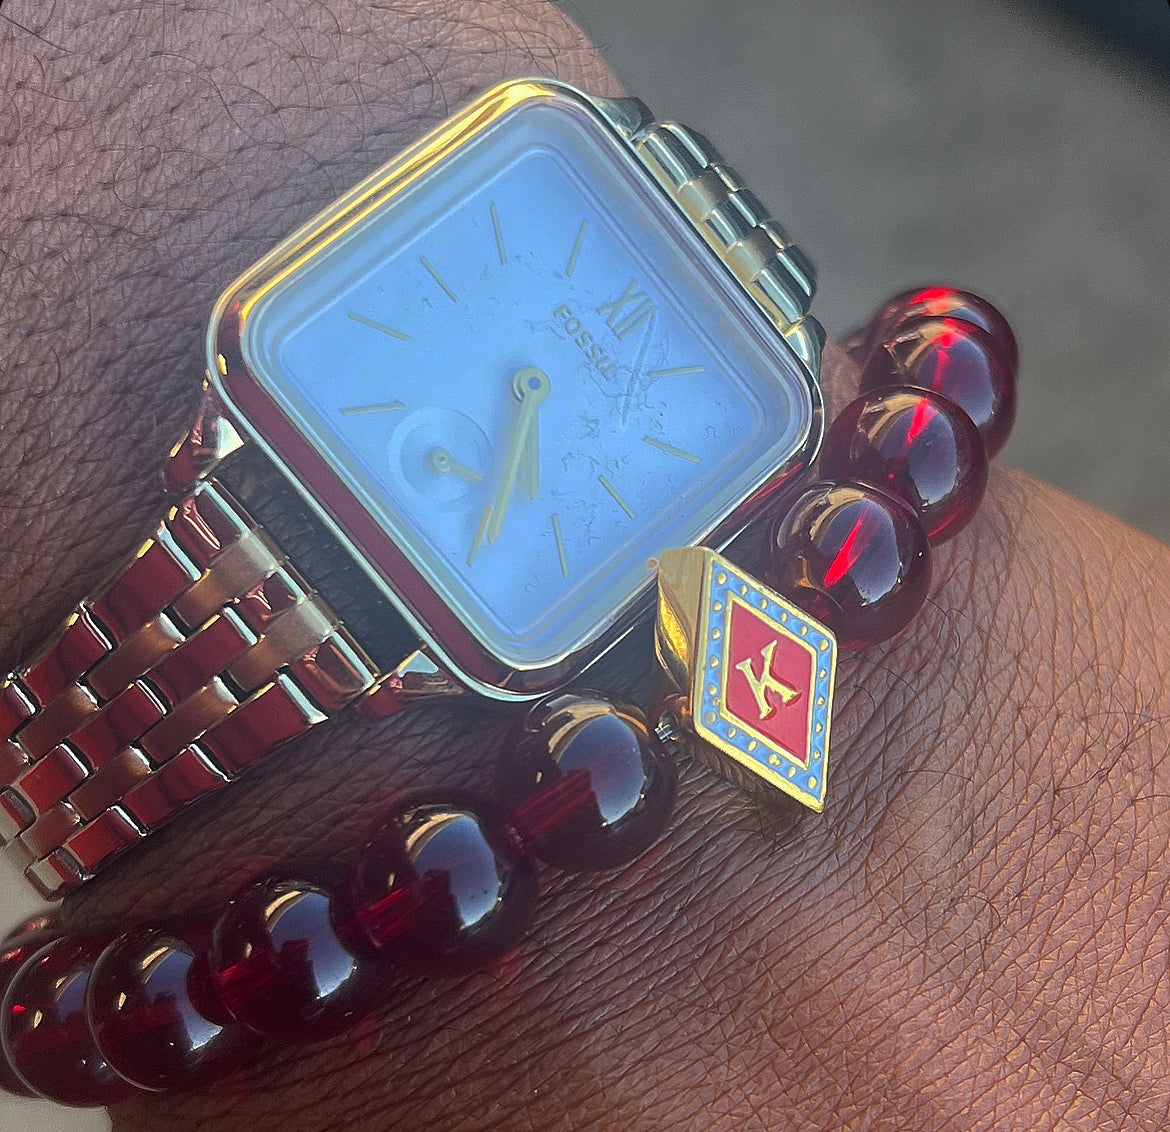 This Kappa Alpha Psi beaded bracelet is a must-have for any member of the Fraternity organization. The intricate beadwork and floating K logo make this bracelet a unique and stylish addition to any outfit. Perfect for showing off your pride and representing your organization.

Ideal for collectors of historical memorabilia, this bracelet is a great addition to any collection. Whether you wear it every day or save it for special occasions, it is sure to be a conversation starter. 